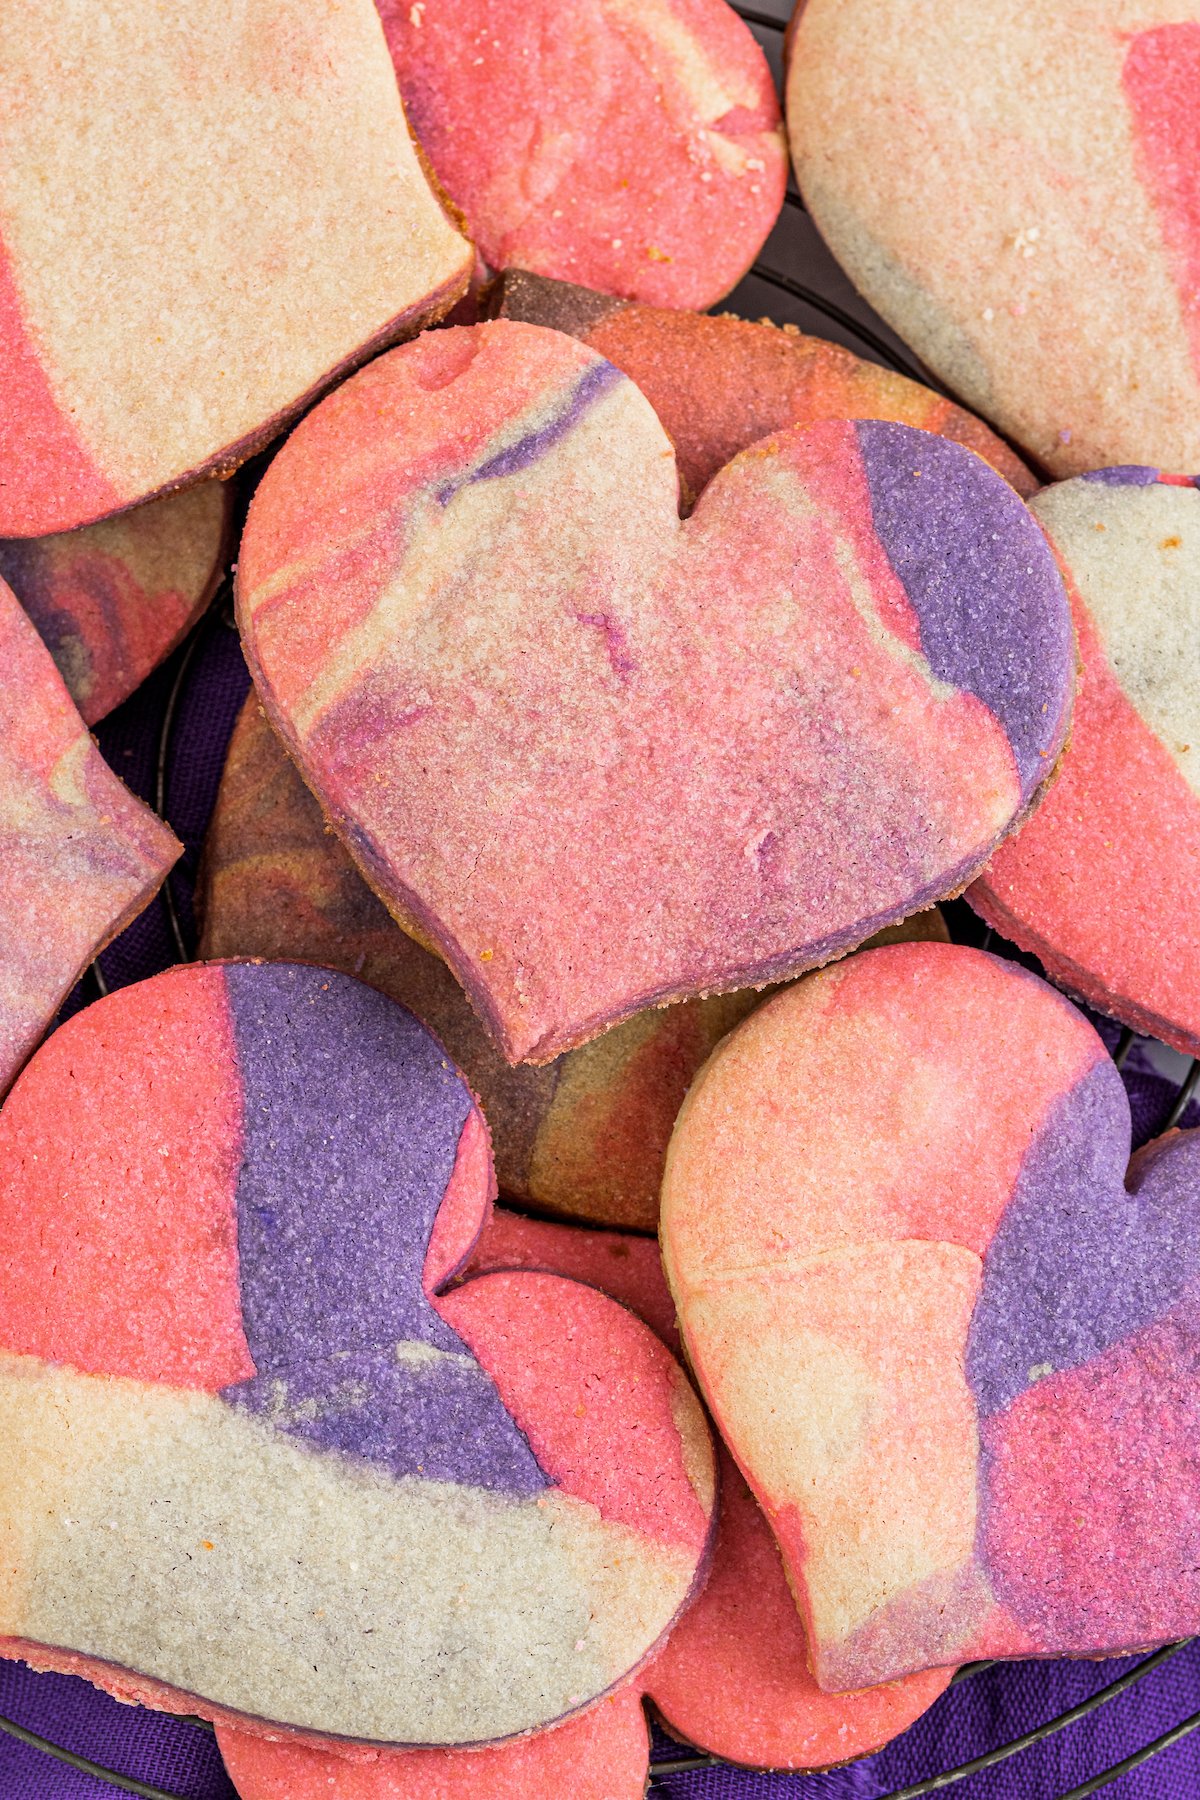 Heart shaped marbled sugar cookies on a cooling cookie rack with a purple napkin below.